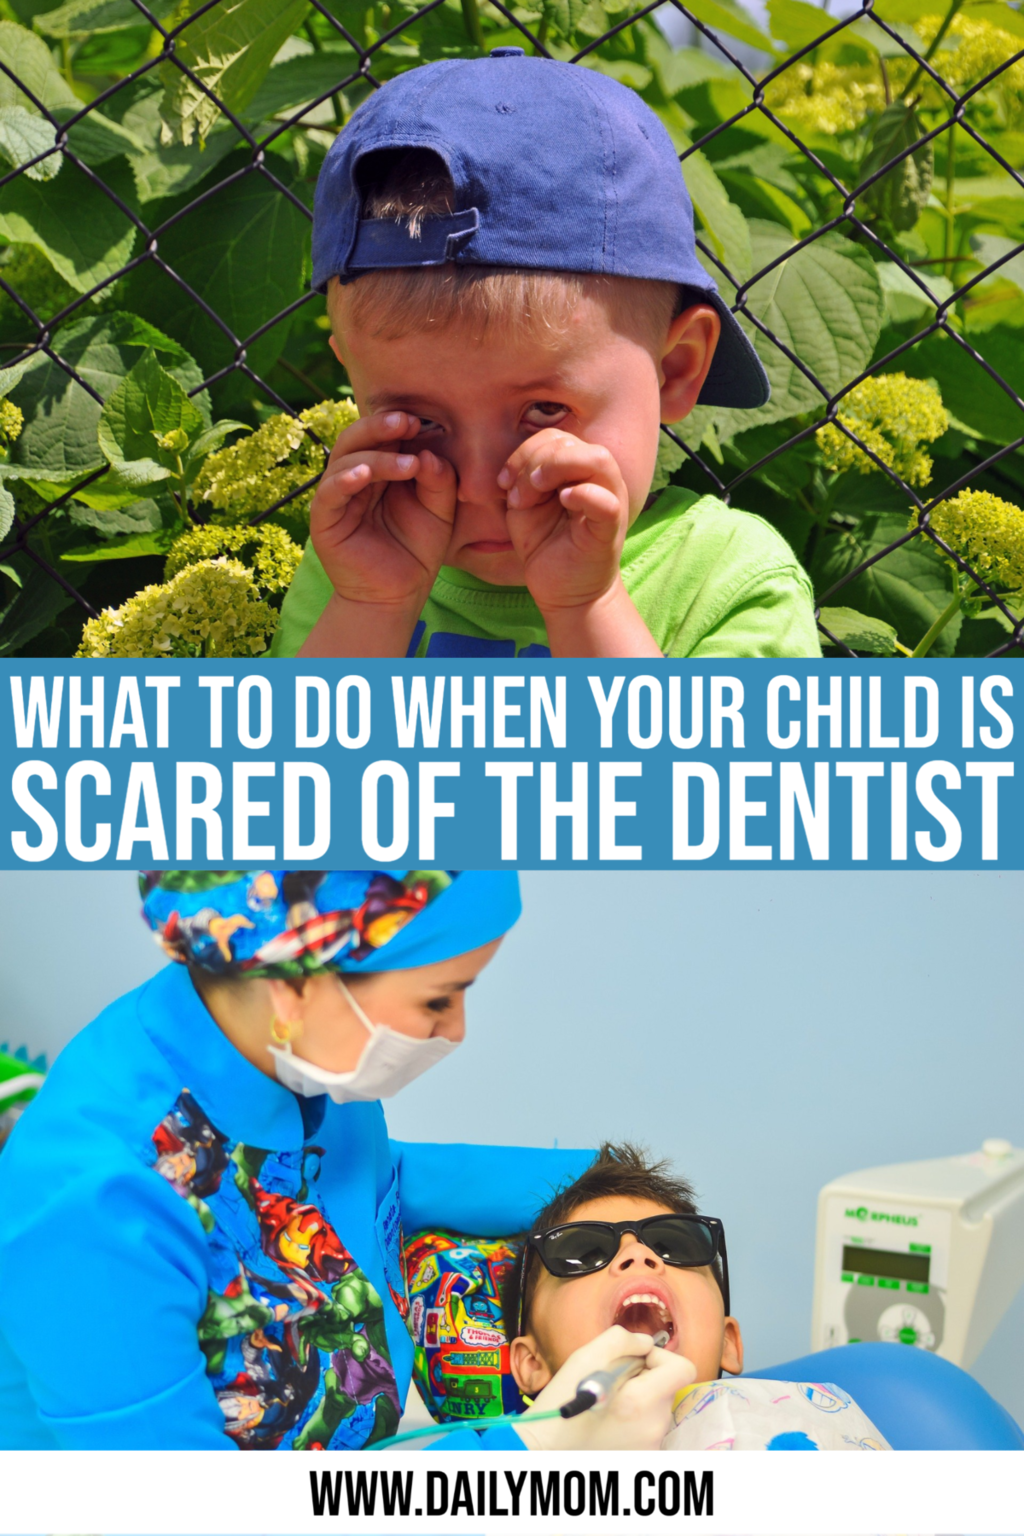 Scared Of The Dentist: 4 Ways To Prevent Fear And Support Your Child